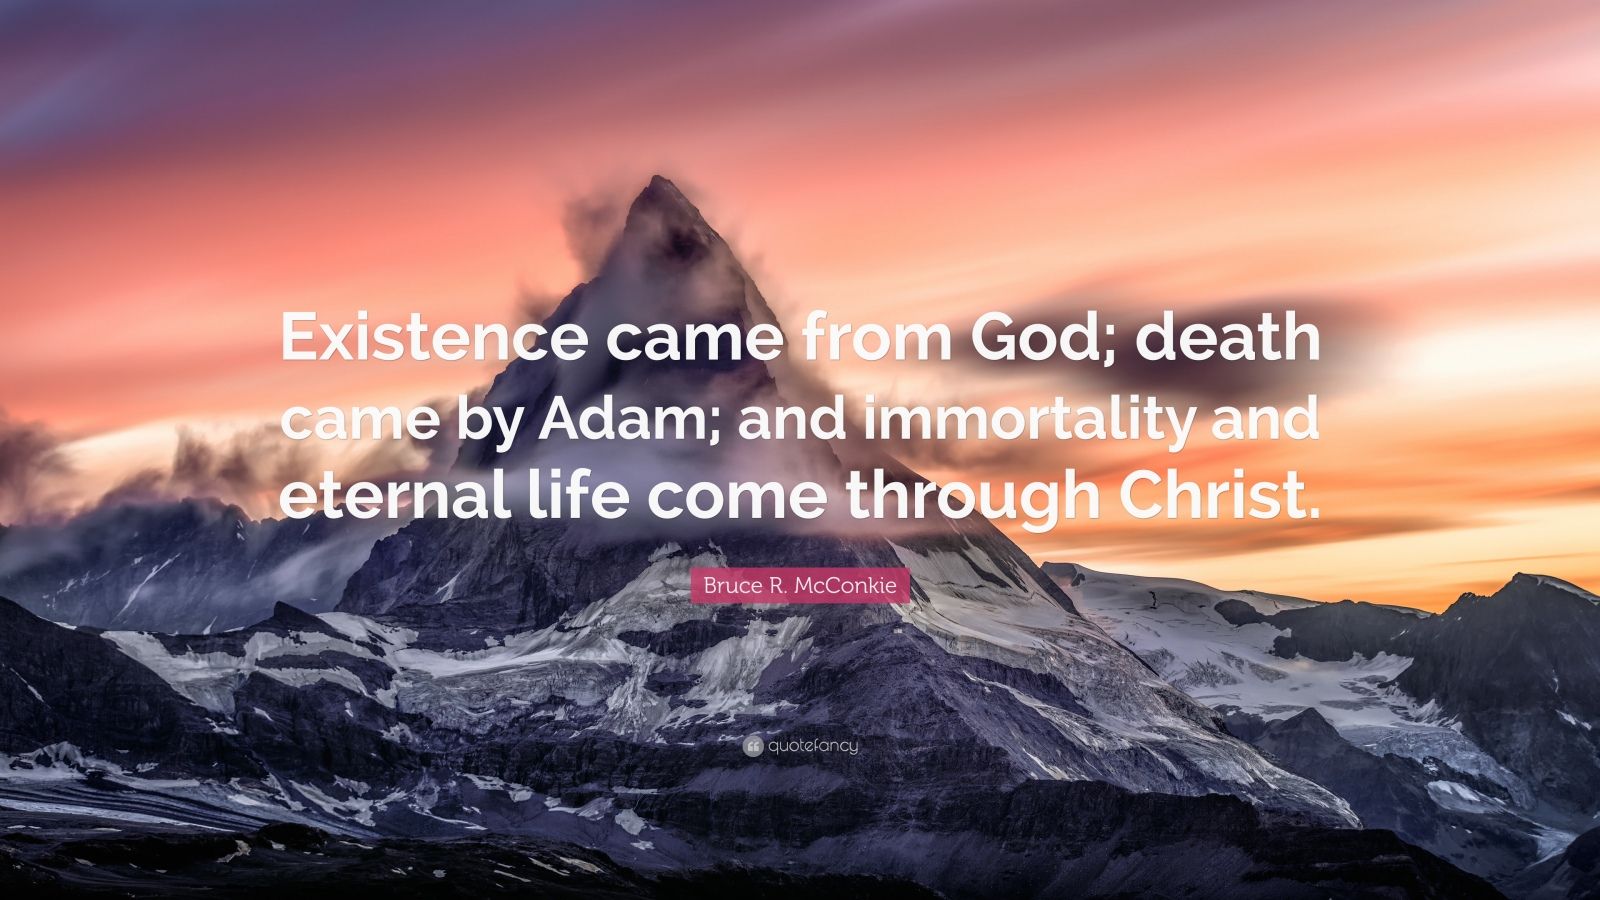 Bruce R. McConkie Quote: "Existence came from God; death ...